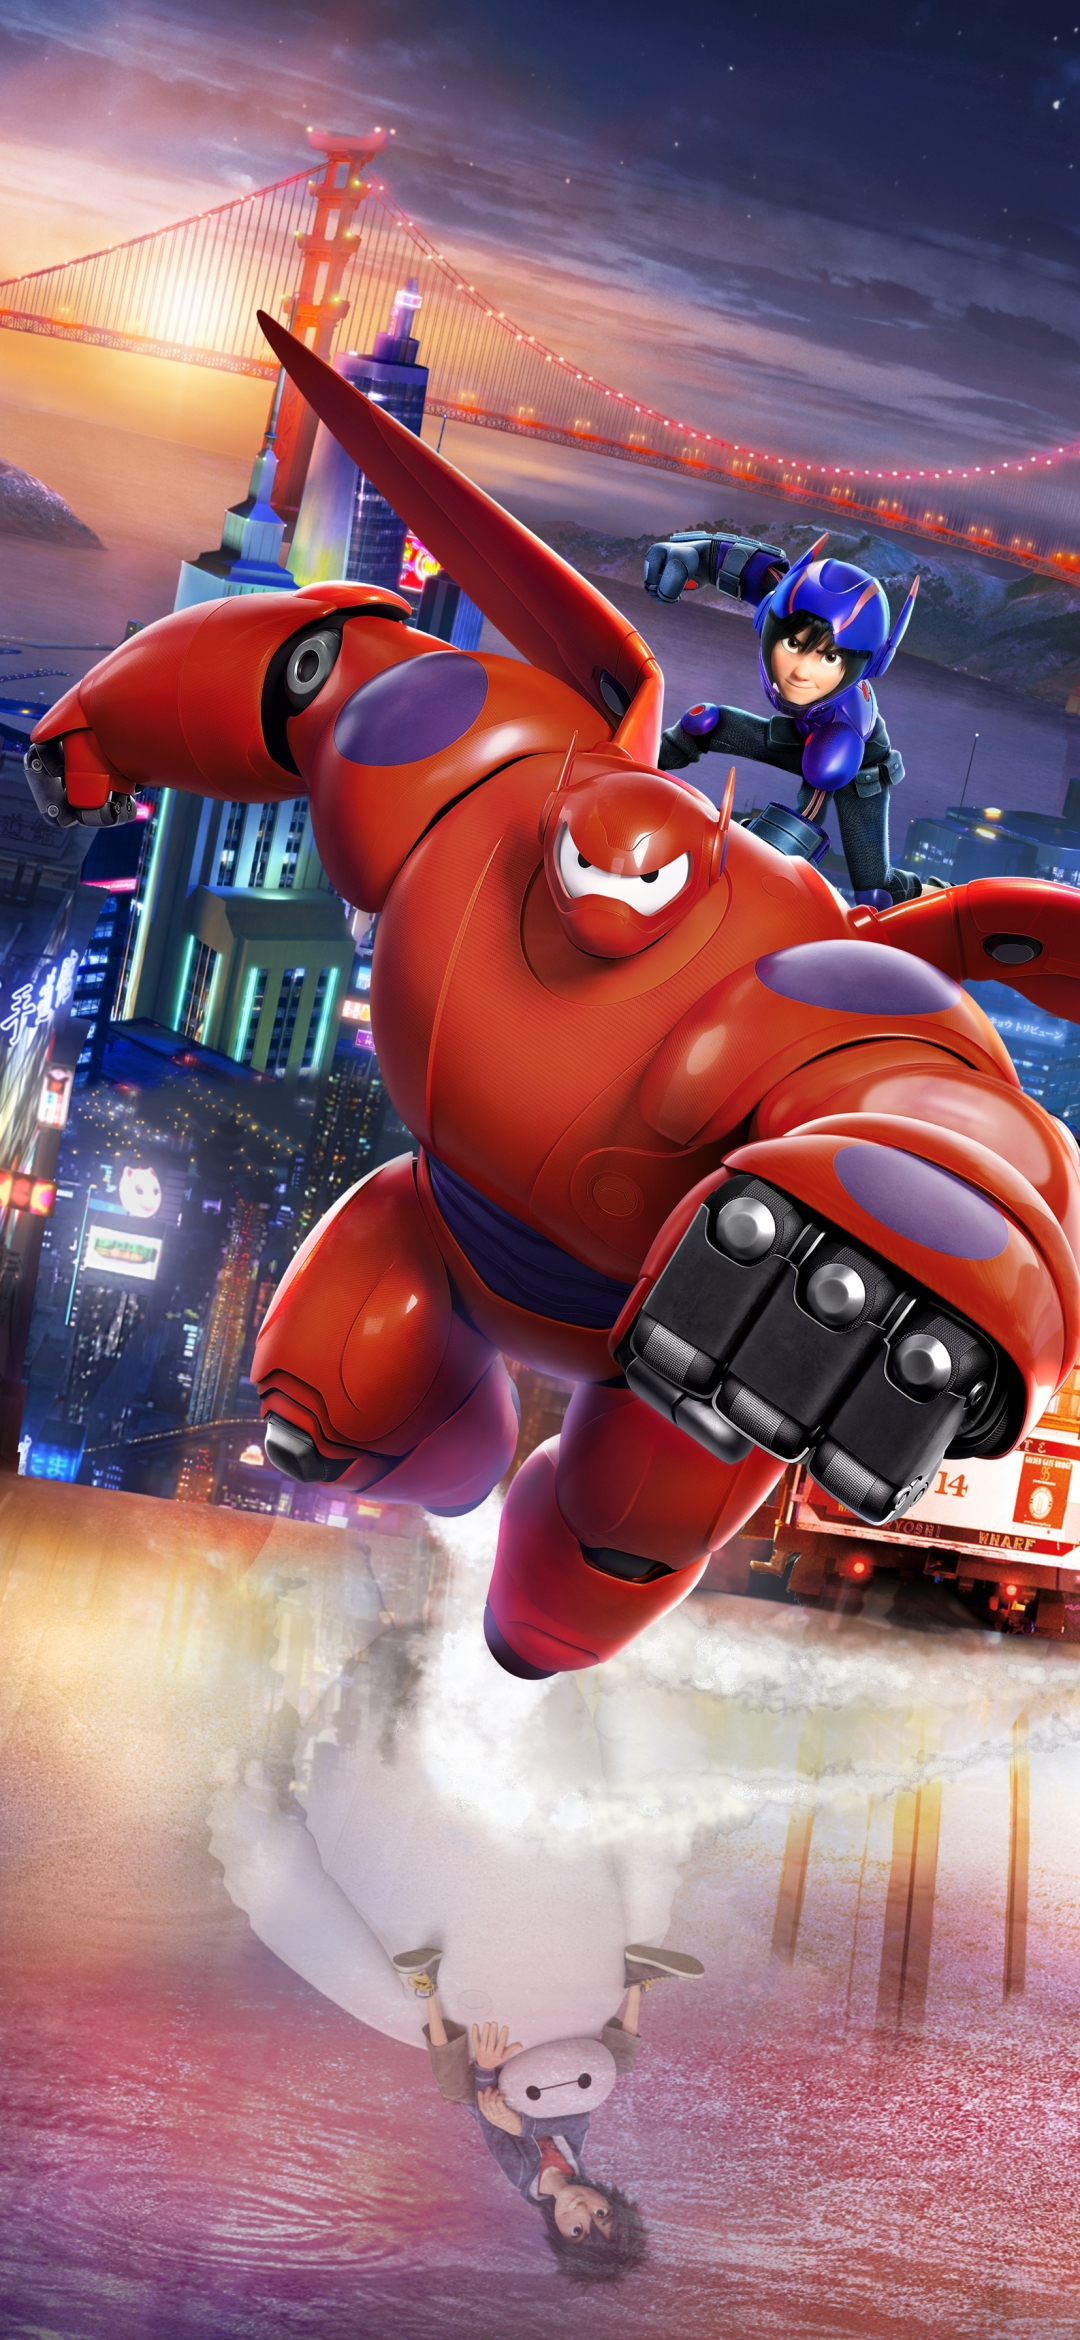 Baymax TV Series Wallpapers 24 images inside